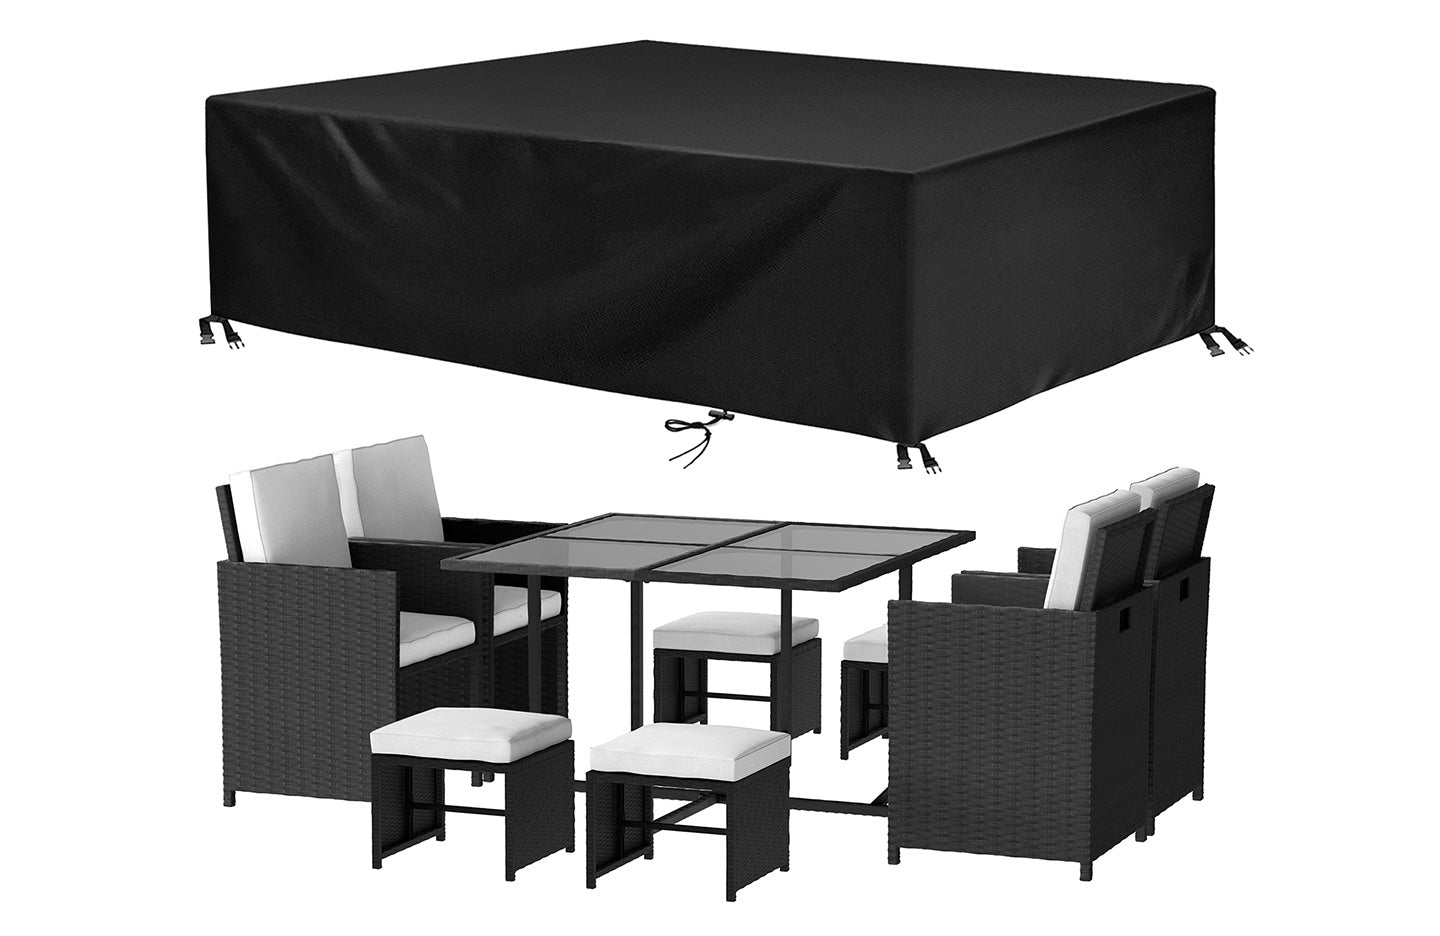 9 PCS Garden Furniture Set 8 Seater Rattan Dining Set Outdoor Table Chairs with Protective Cover Black